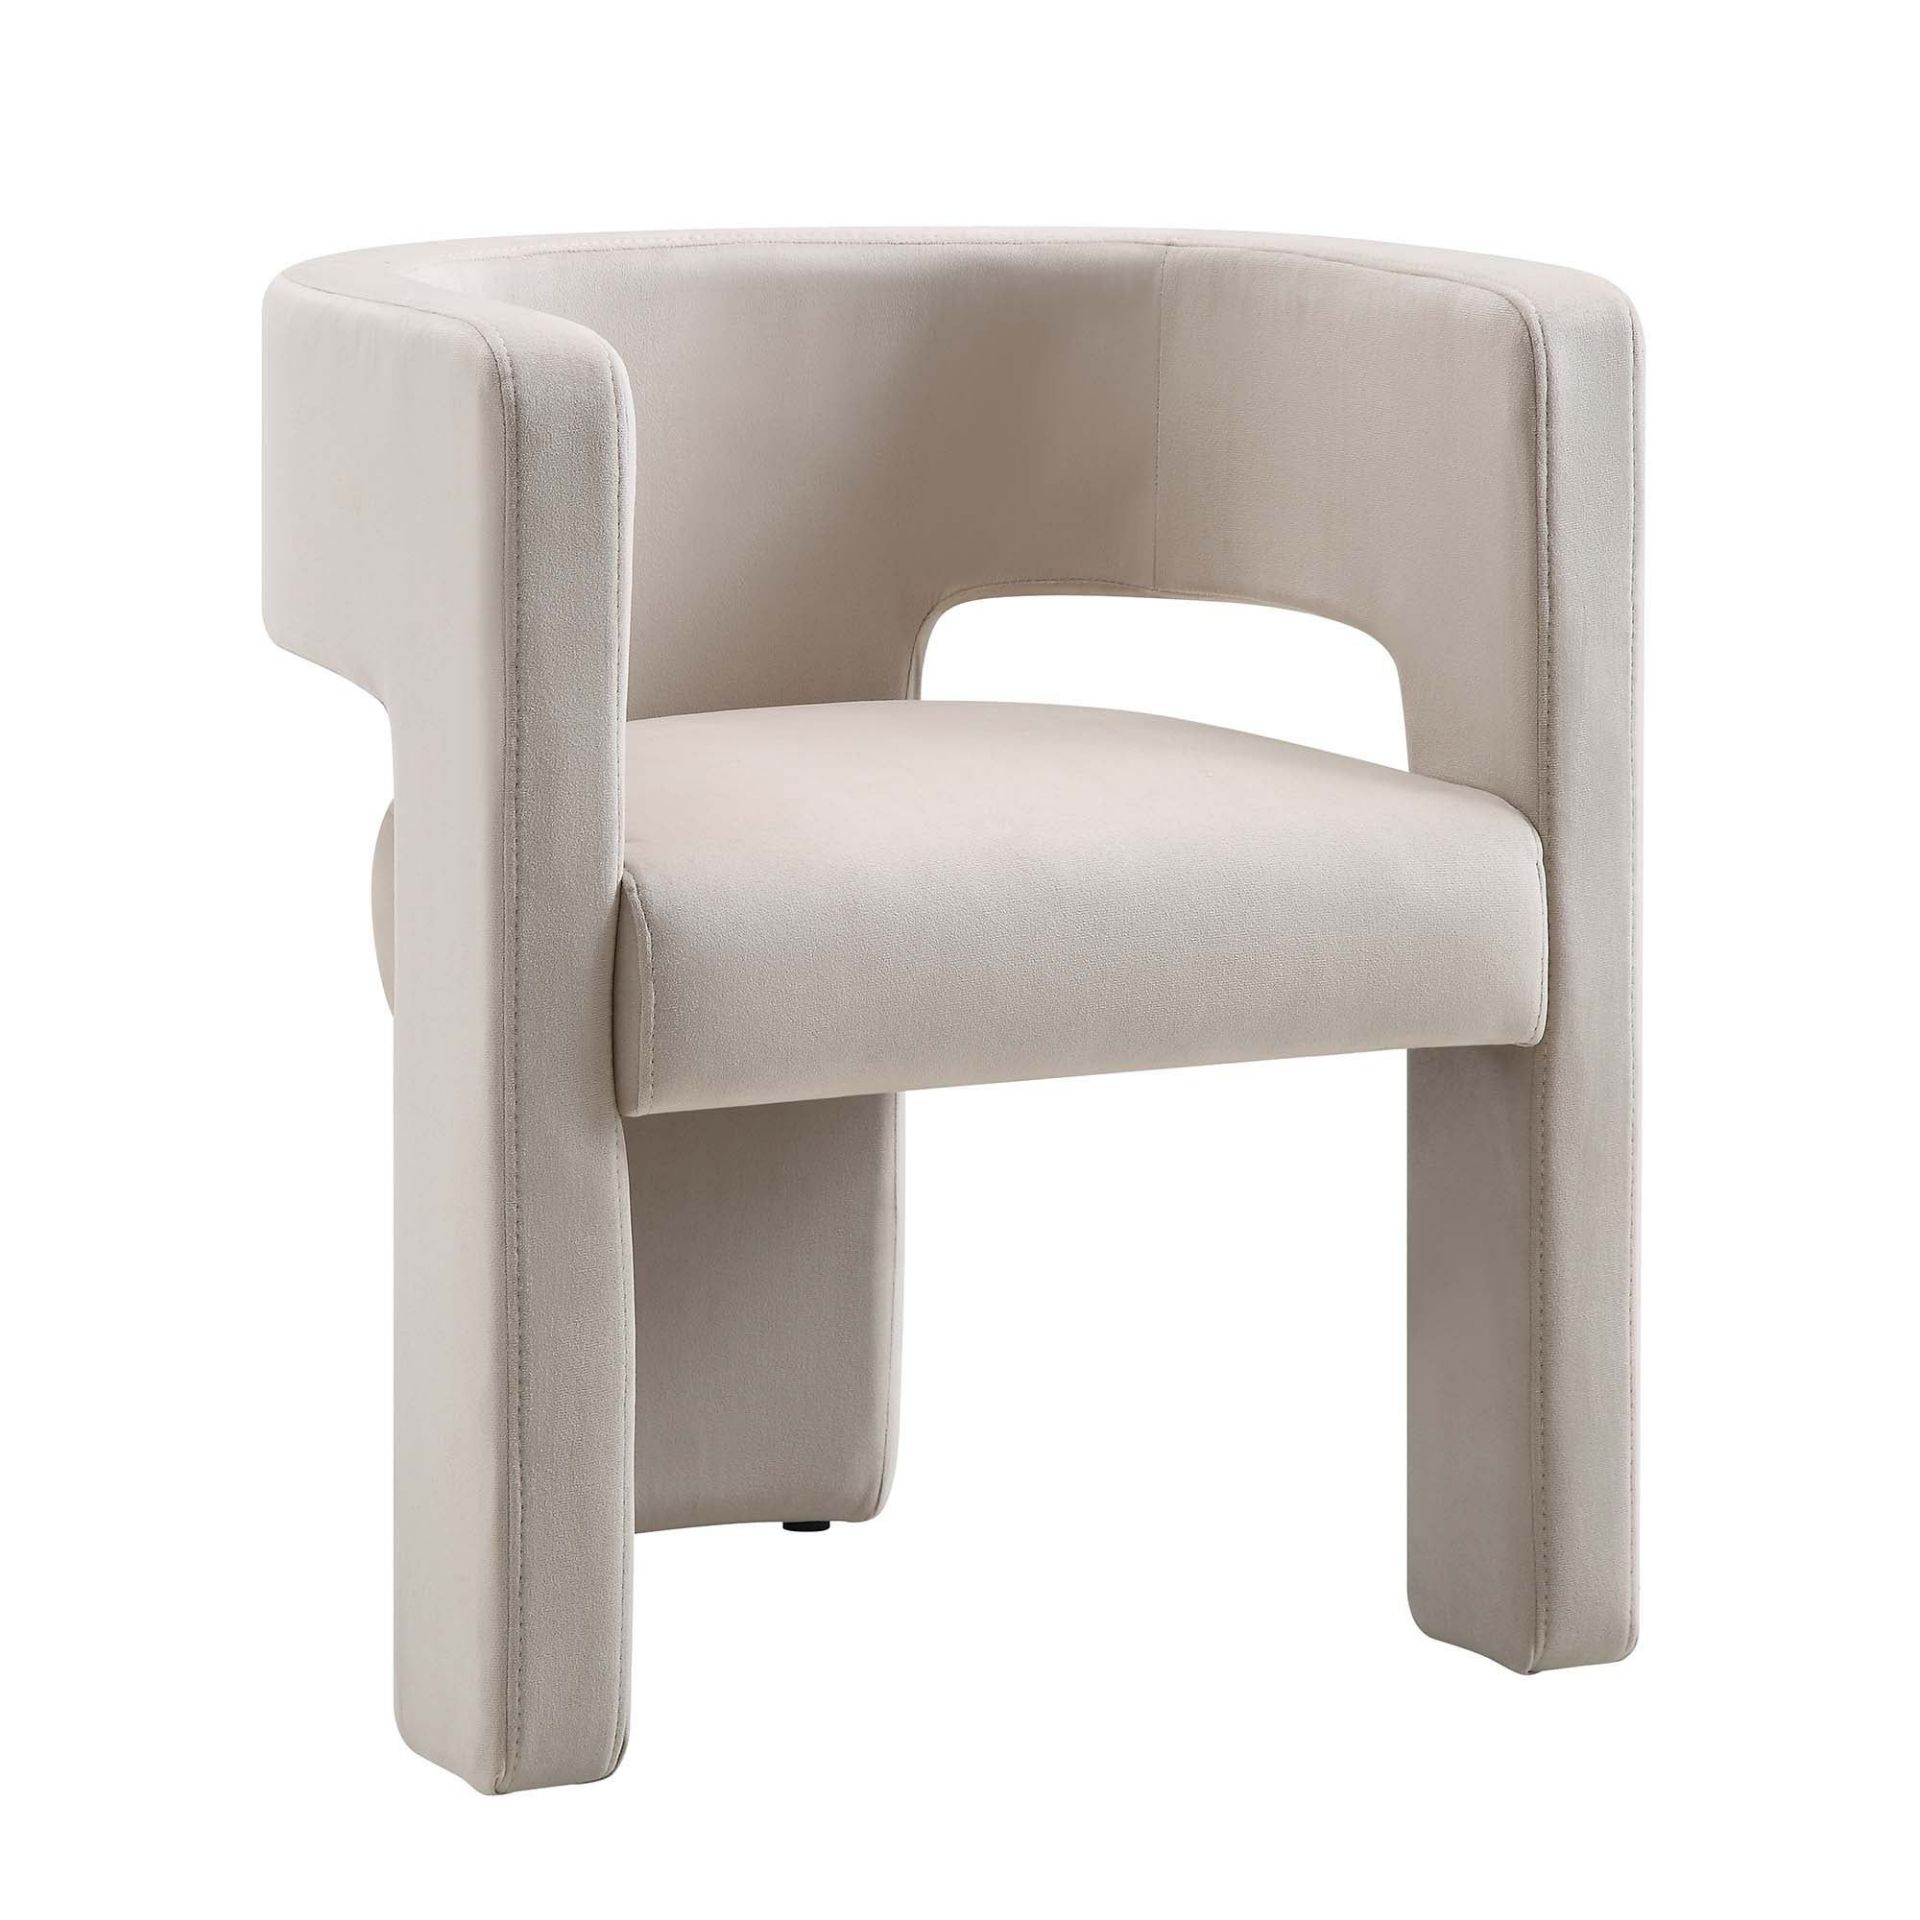 Greenwich Champagne Velvet Dining Chair. - ER29. RRP £229.99. Our beautiful Greenwich chair features - Bild 2 aus 2